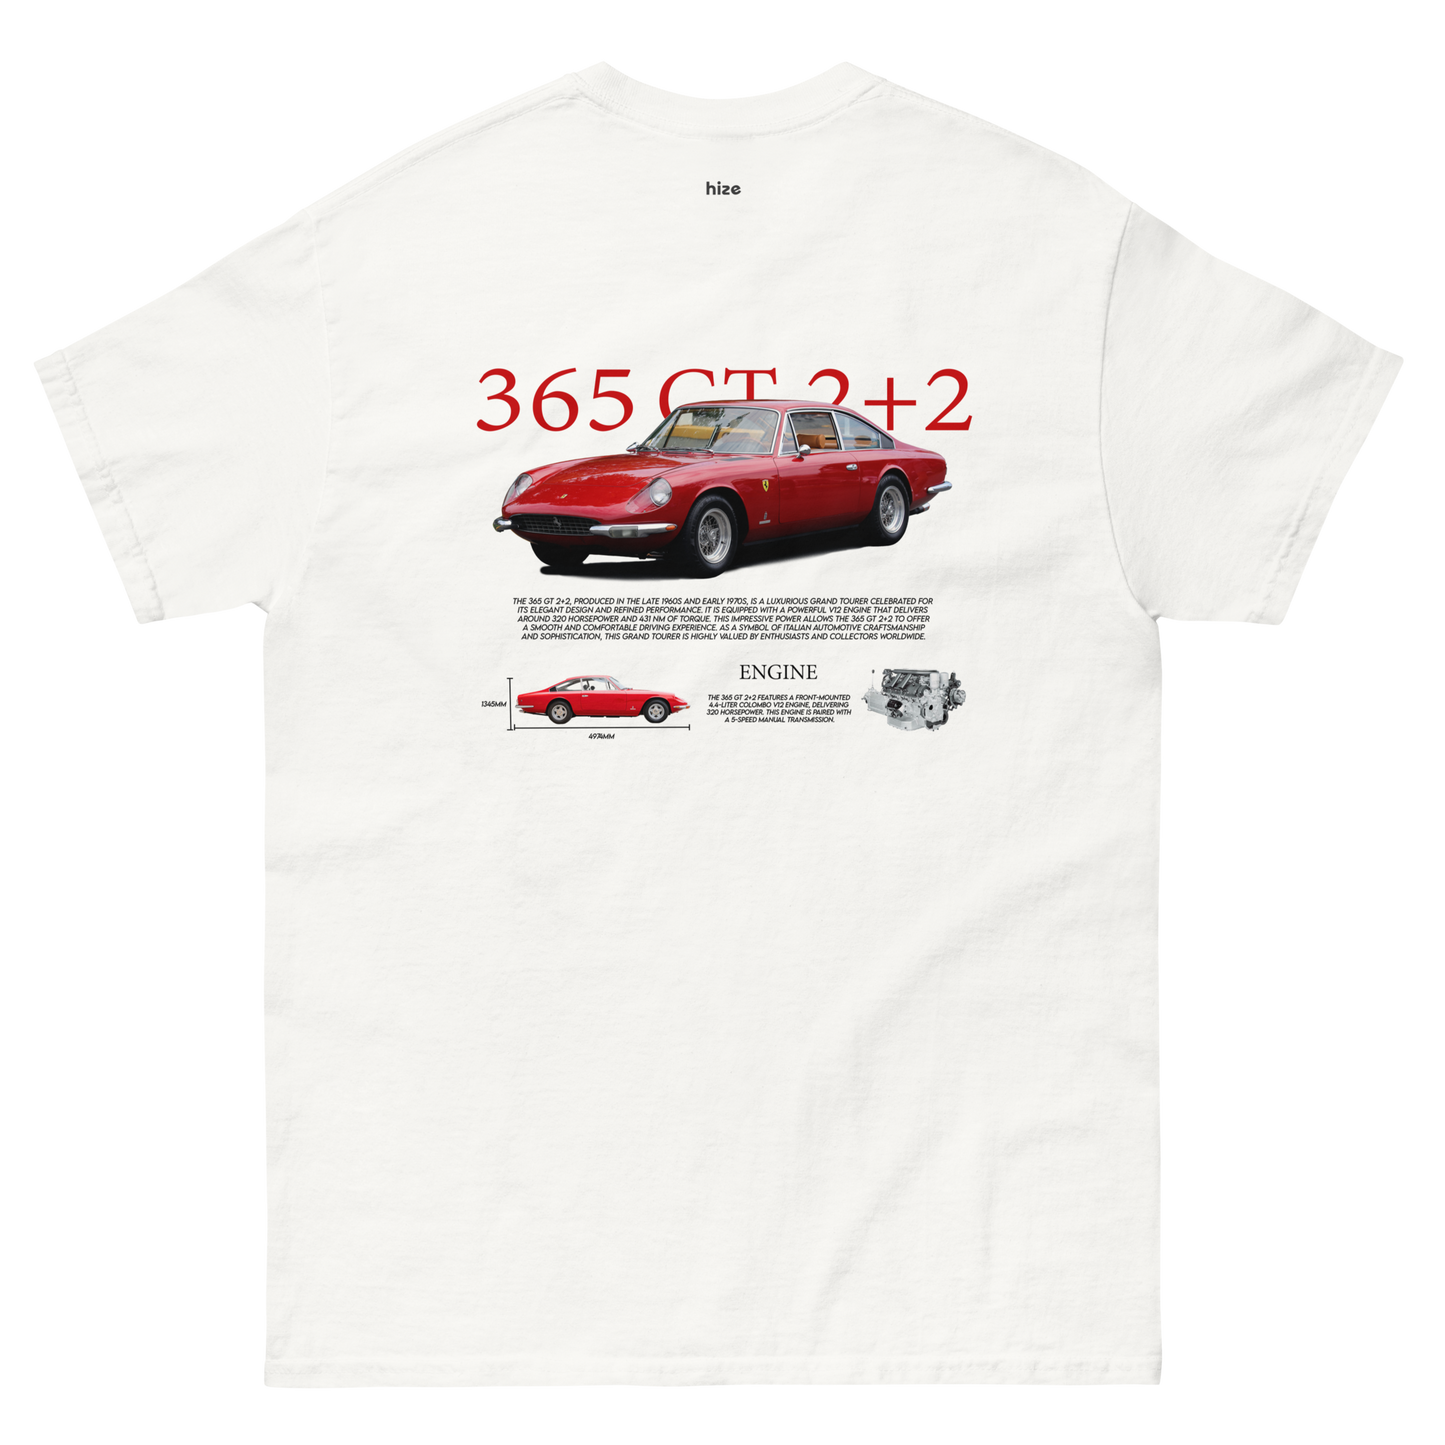 365 GT 2+2 T-shirt - White Back View